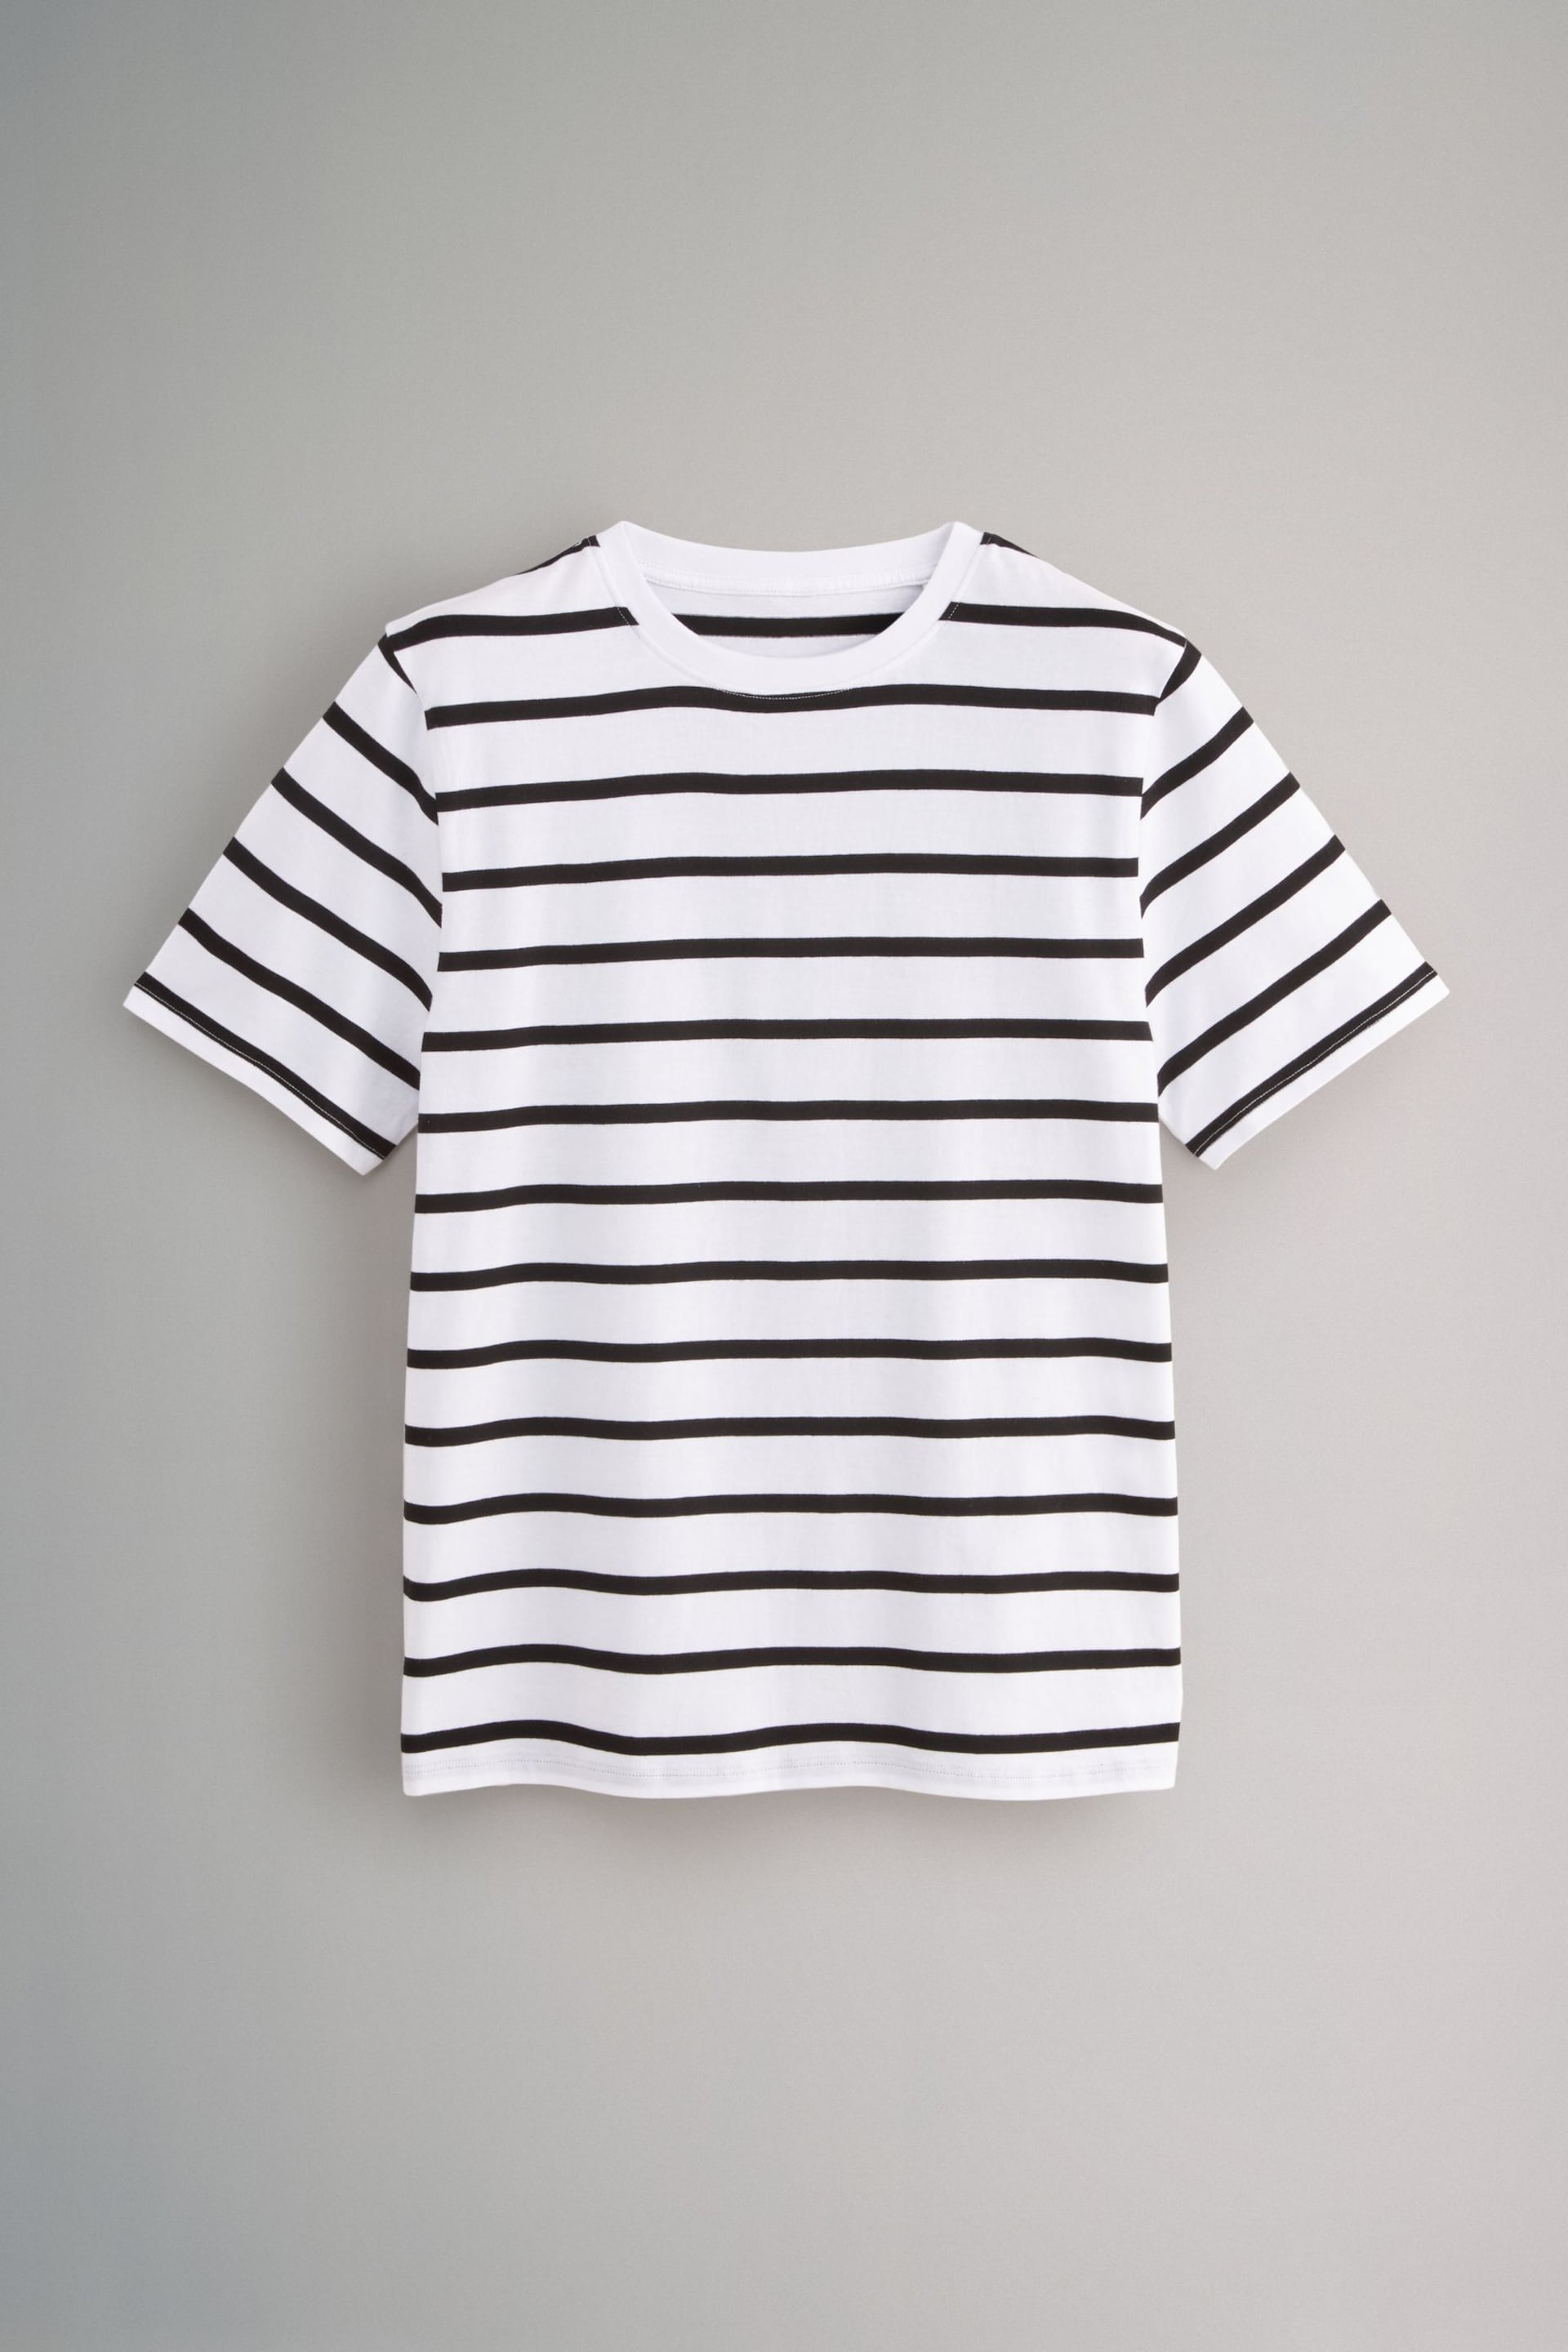 The Set Black/Grey/White/Stripe 4 Pack Relaxed Short Sleeve T-Shirts - Image 7 of 11